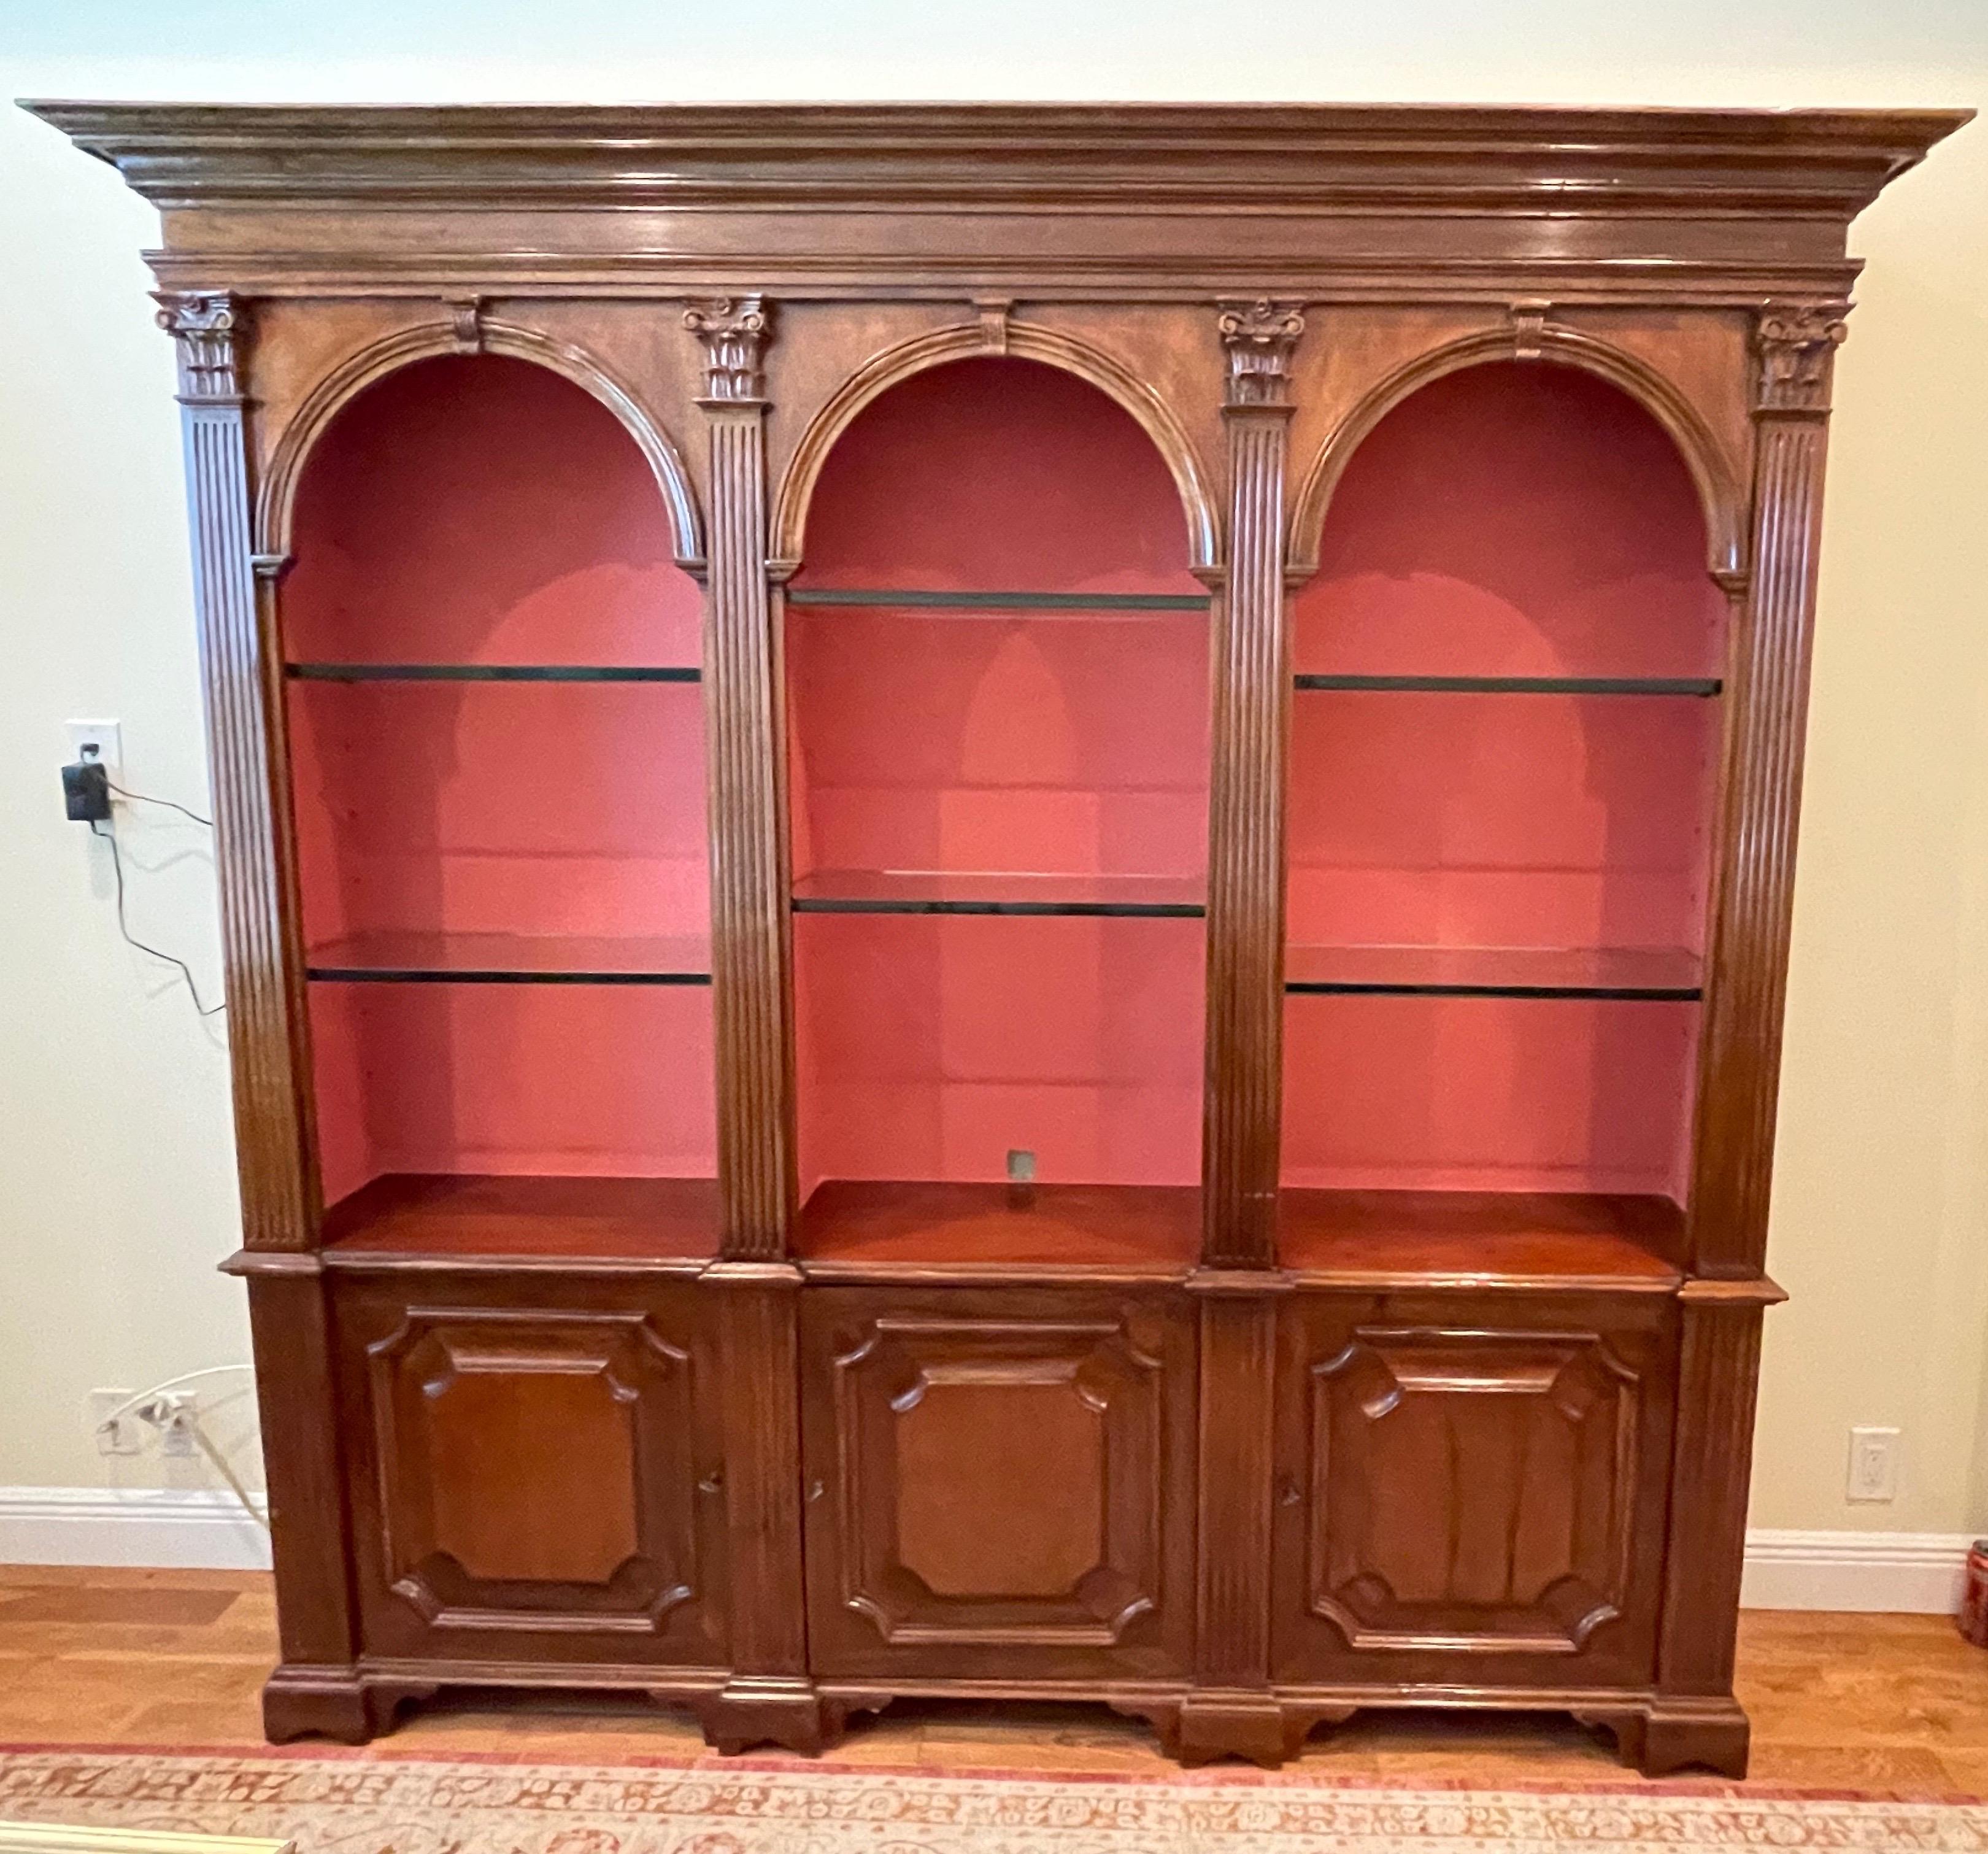 Vintage Italian walnut library cabinet. The top has three compartments with adjustable glass shelves. The bottom has three doors with wood shelves inside for storage.